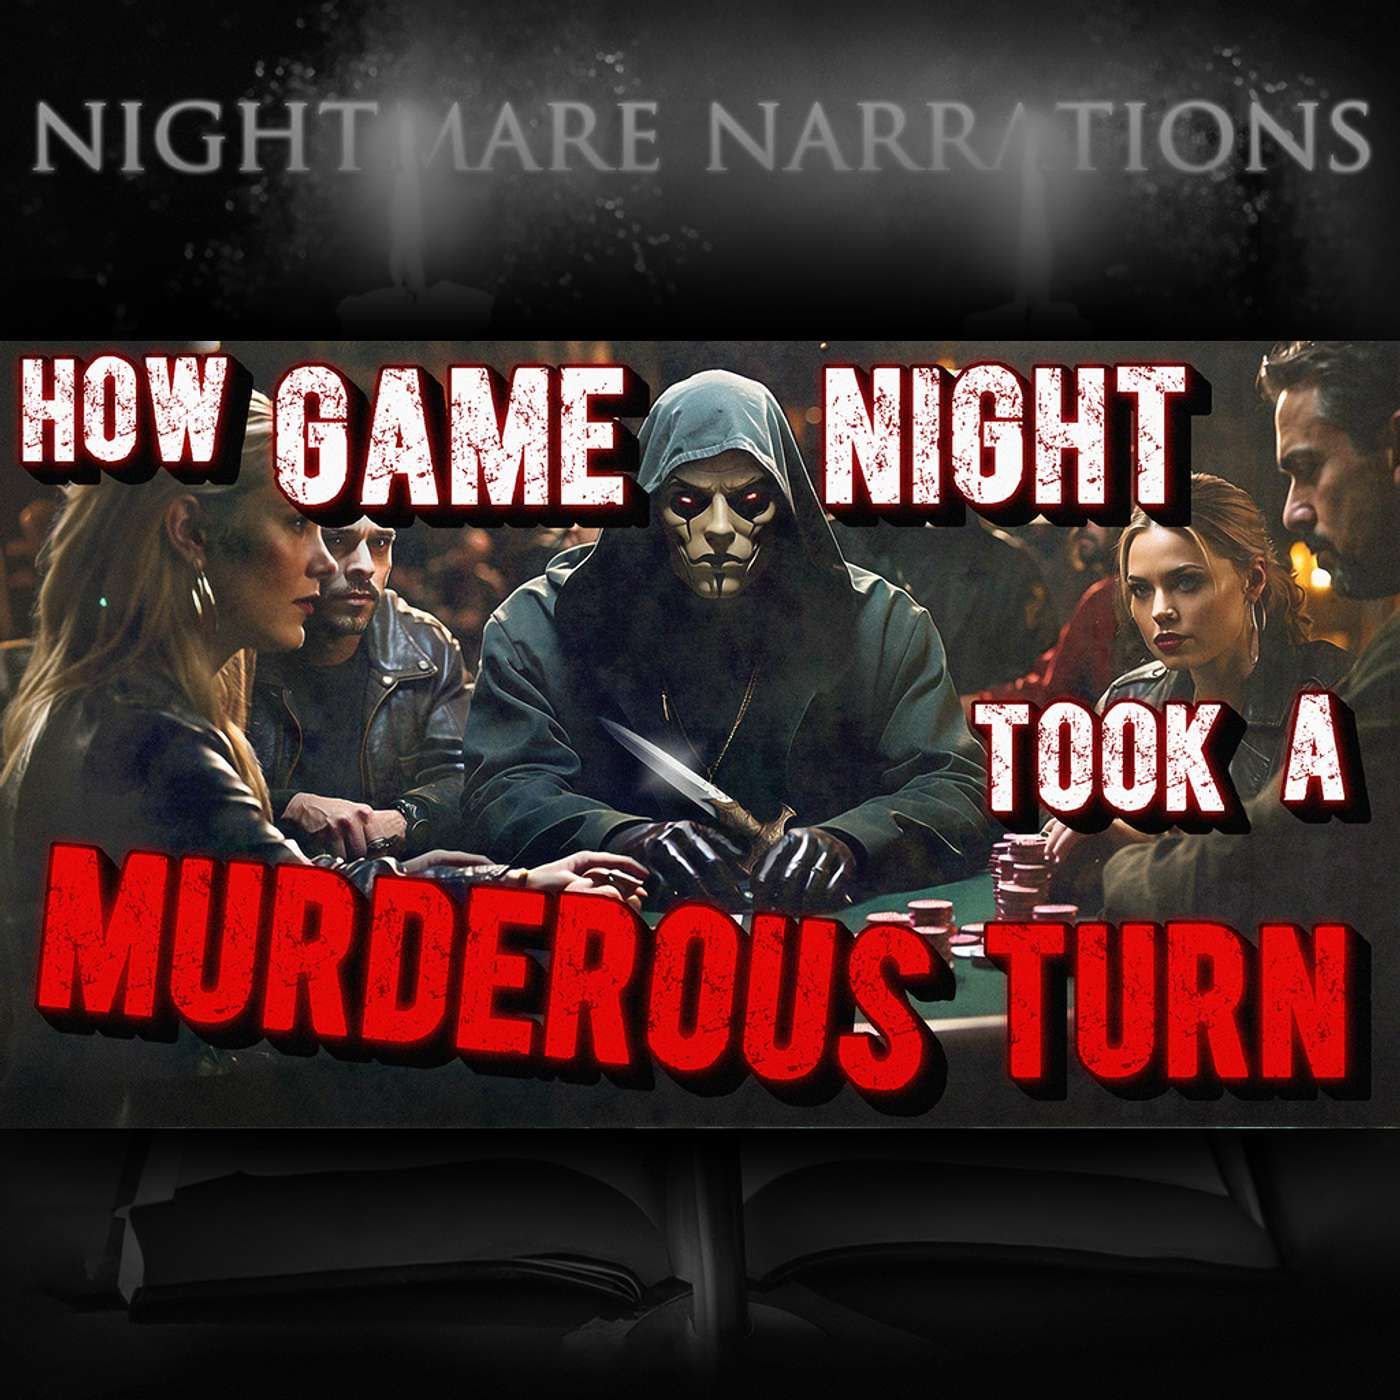 Terrifying: How Game Night Took a Murderous Turn - Scary Story - Nightmare Narration